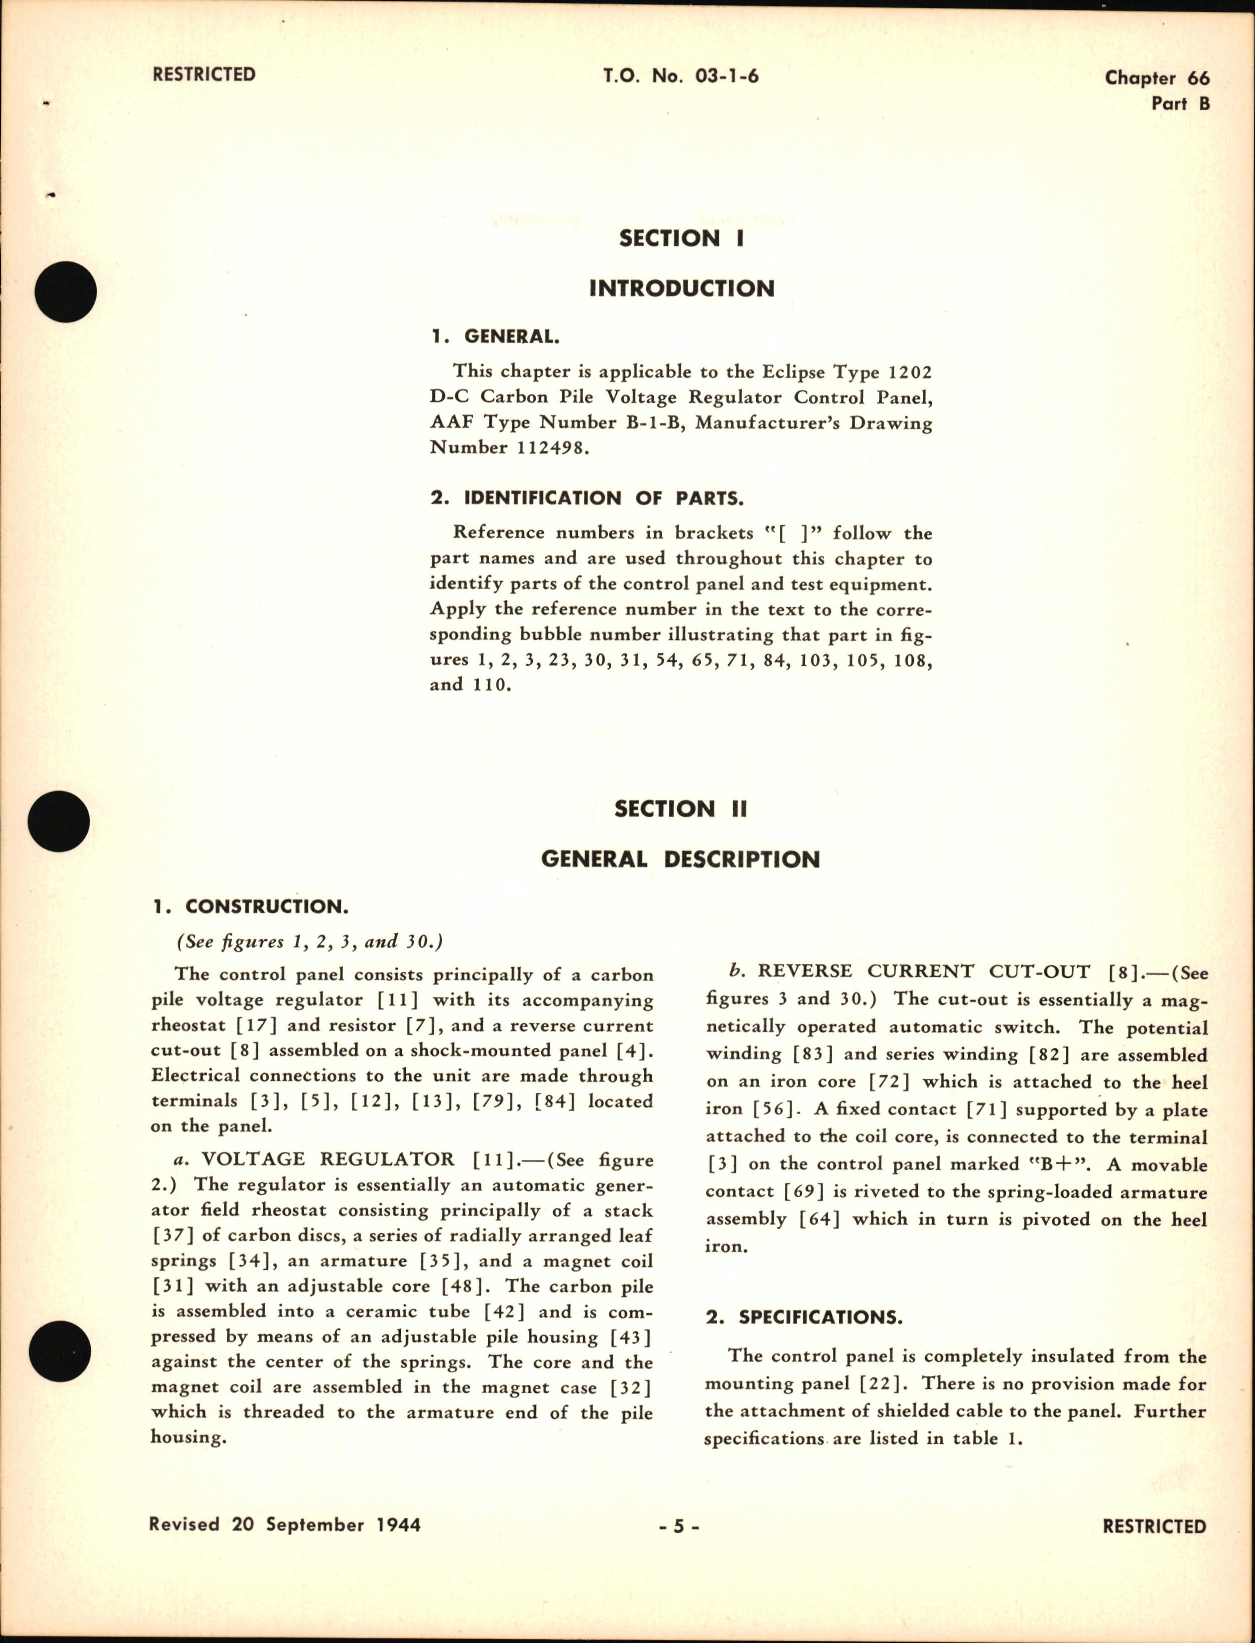 Sample page 5 from AirCorps Library document: Overhaul Instructions for D-C Carbon Pile Voltage Regulator Control Panel